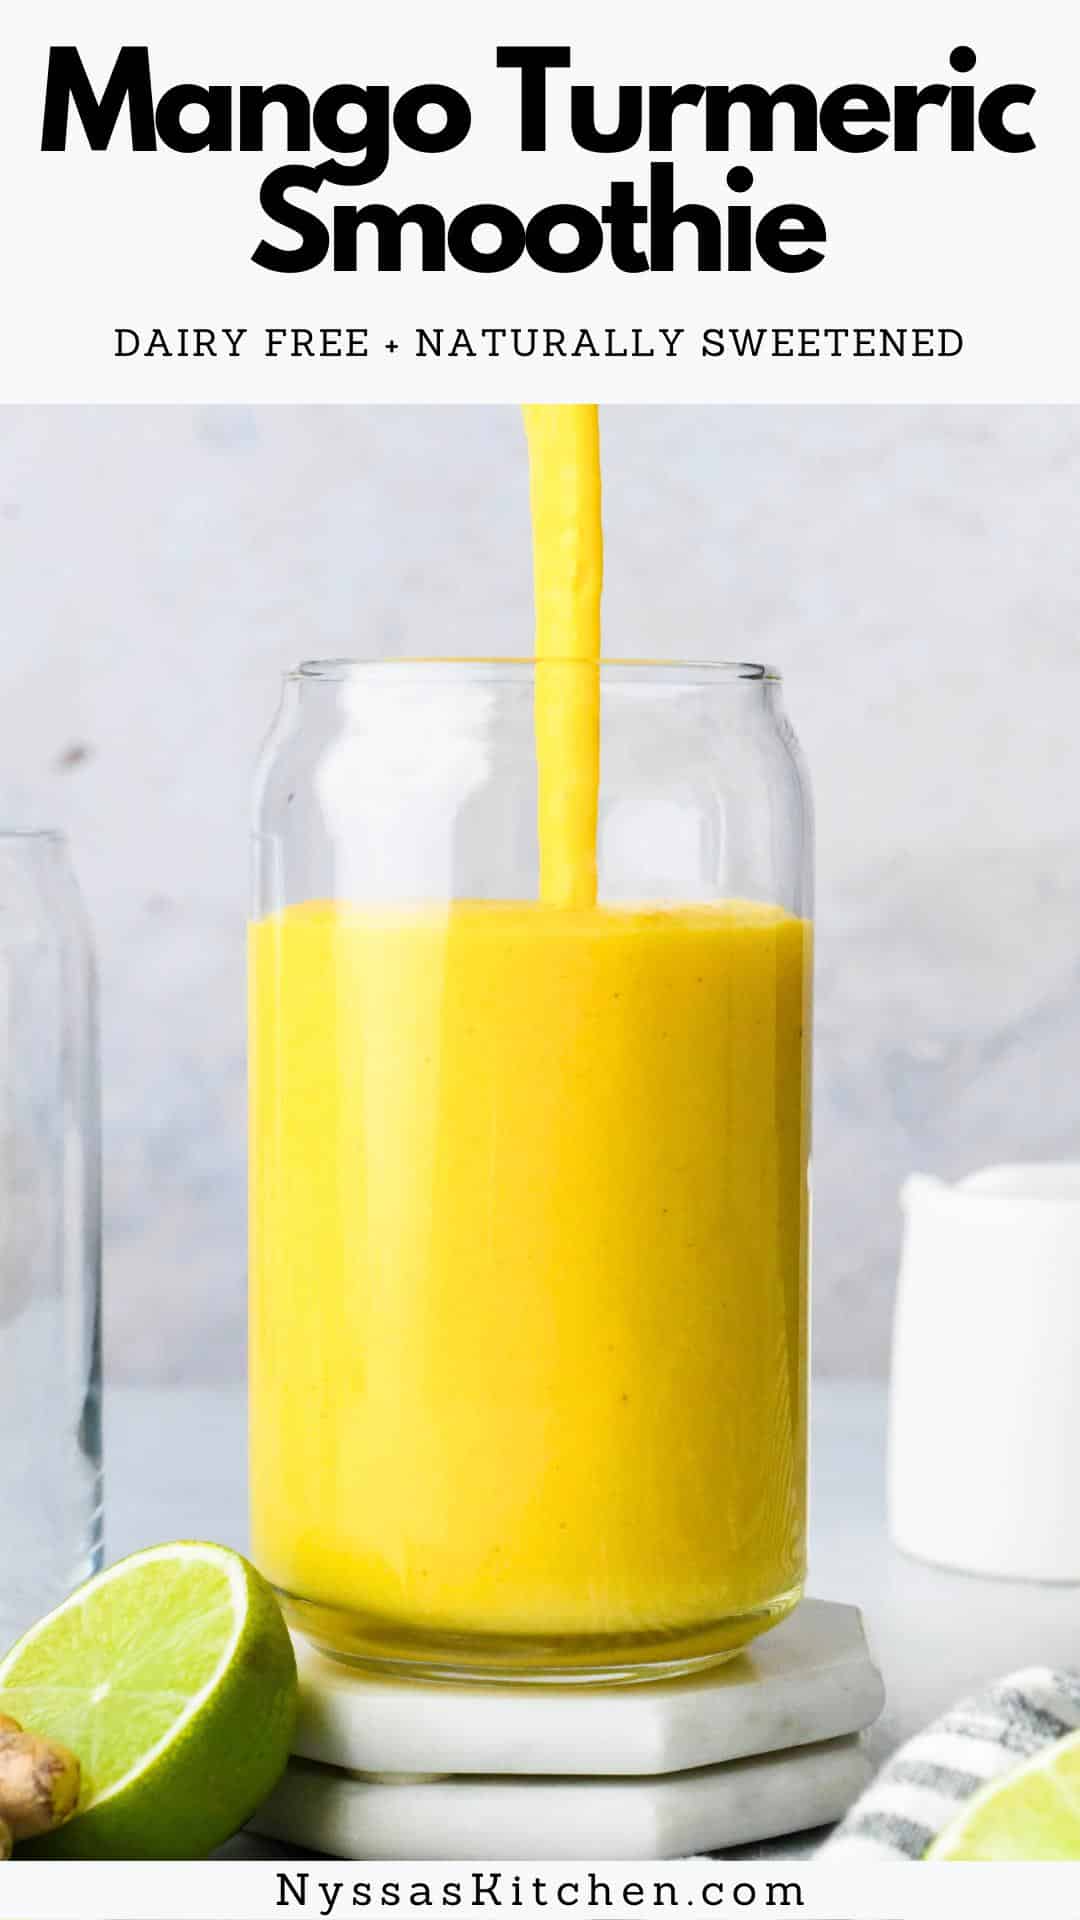 This mango turmeric ginger smoothie is the perfect balance between incredibly delicious and good for you! Sweetened with fruit and a little bit of optional honey, with a bright layer of flavor from fresh lime juice to wake up your taste buds. Tropical, creamy, and filled with anti-inflammatory benefits. Vegan, dairy free, naturally sweetened, gluten free, and paleo friendly.